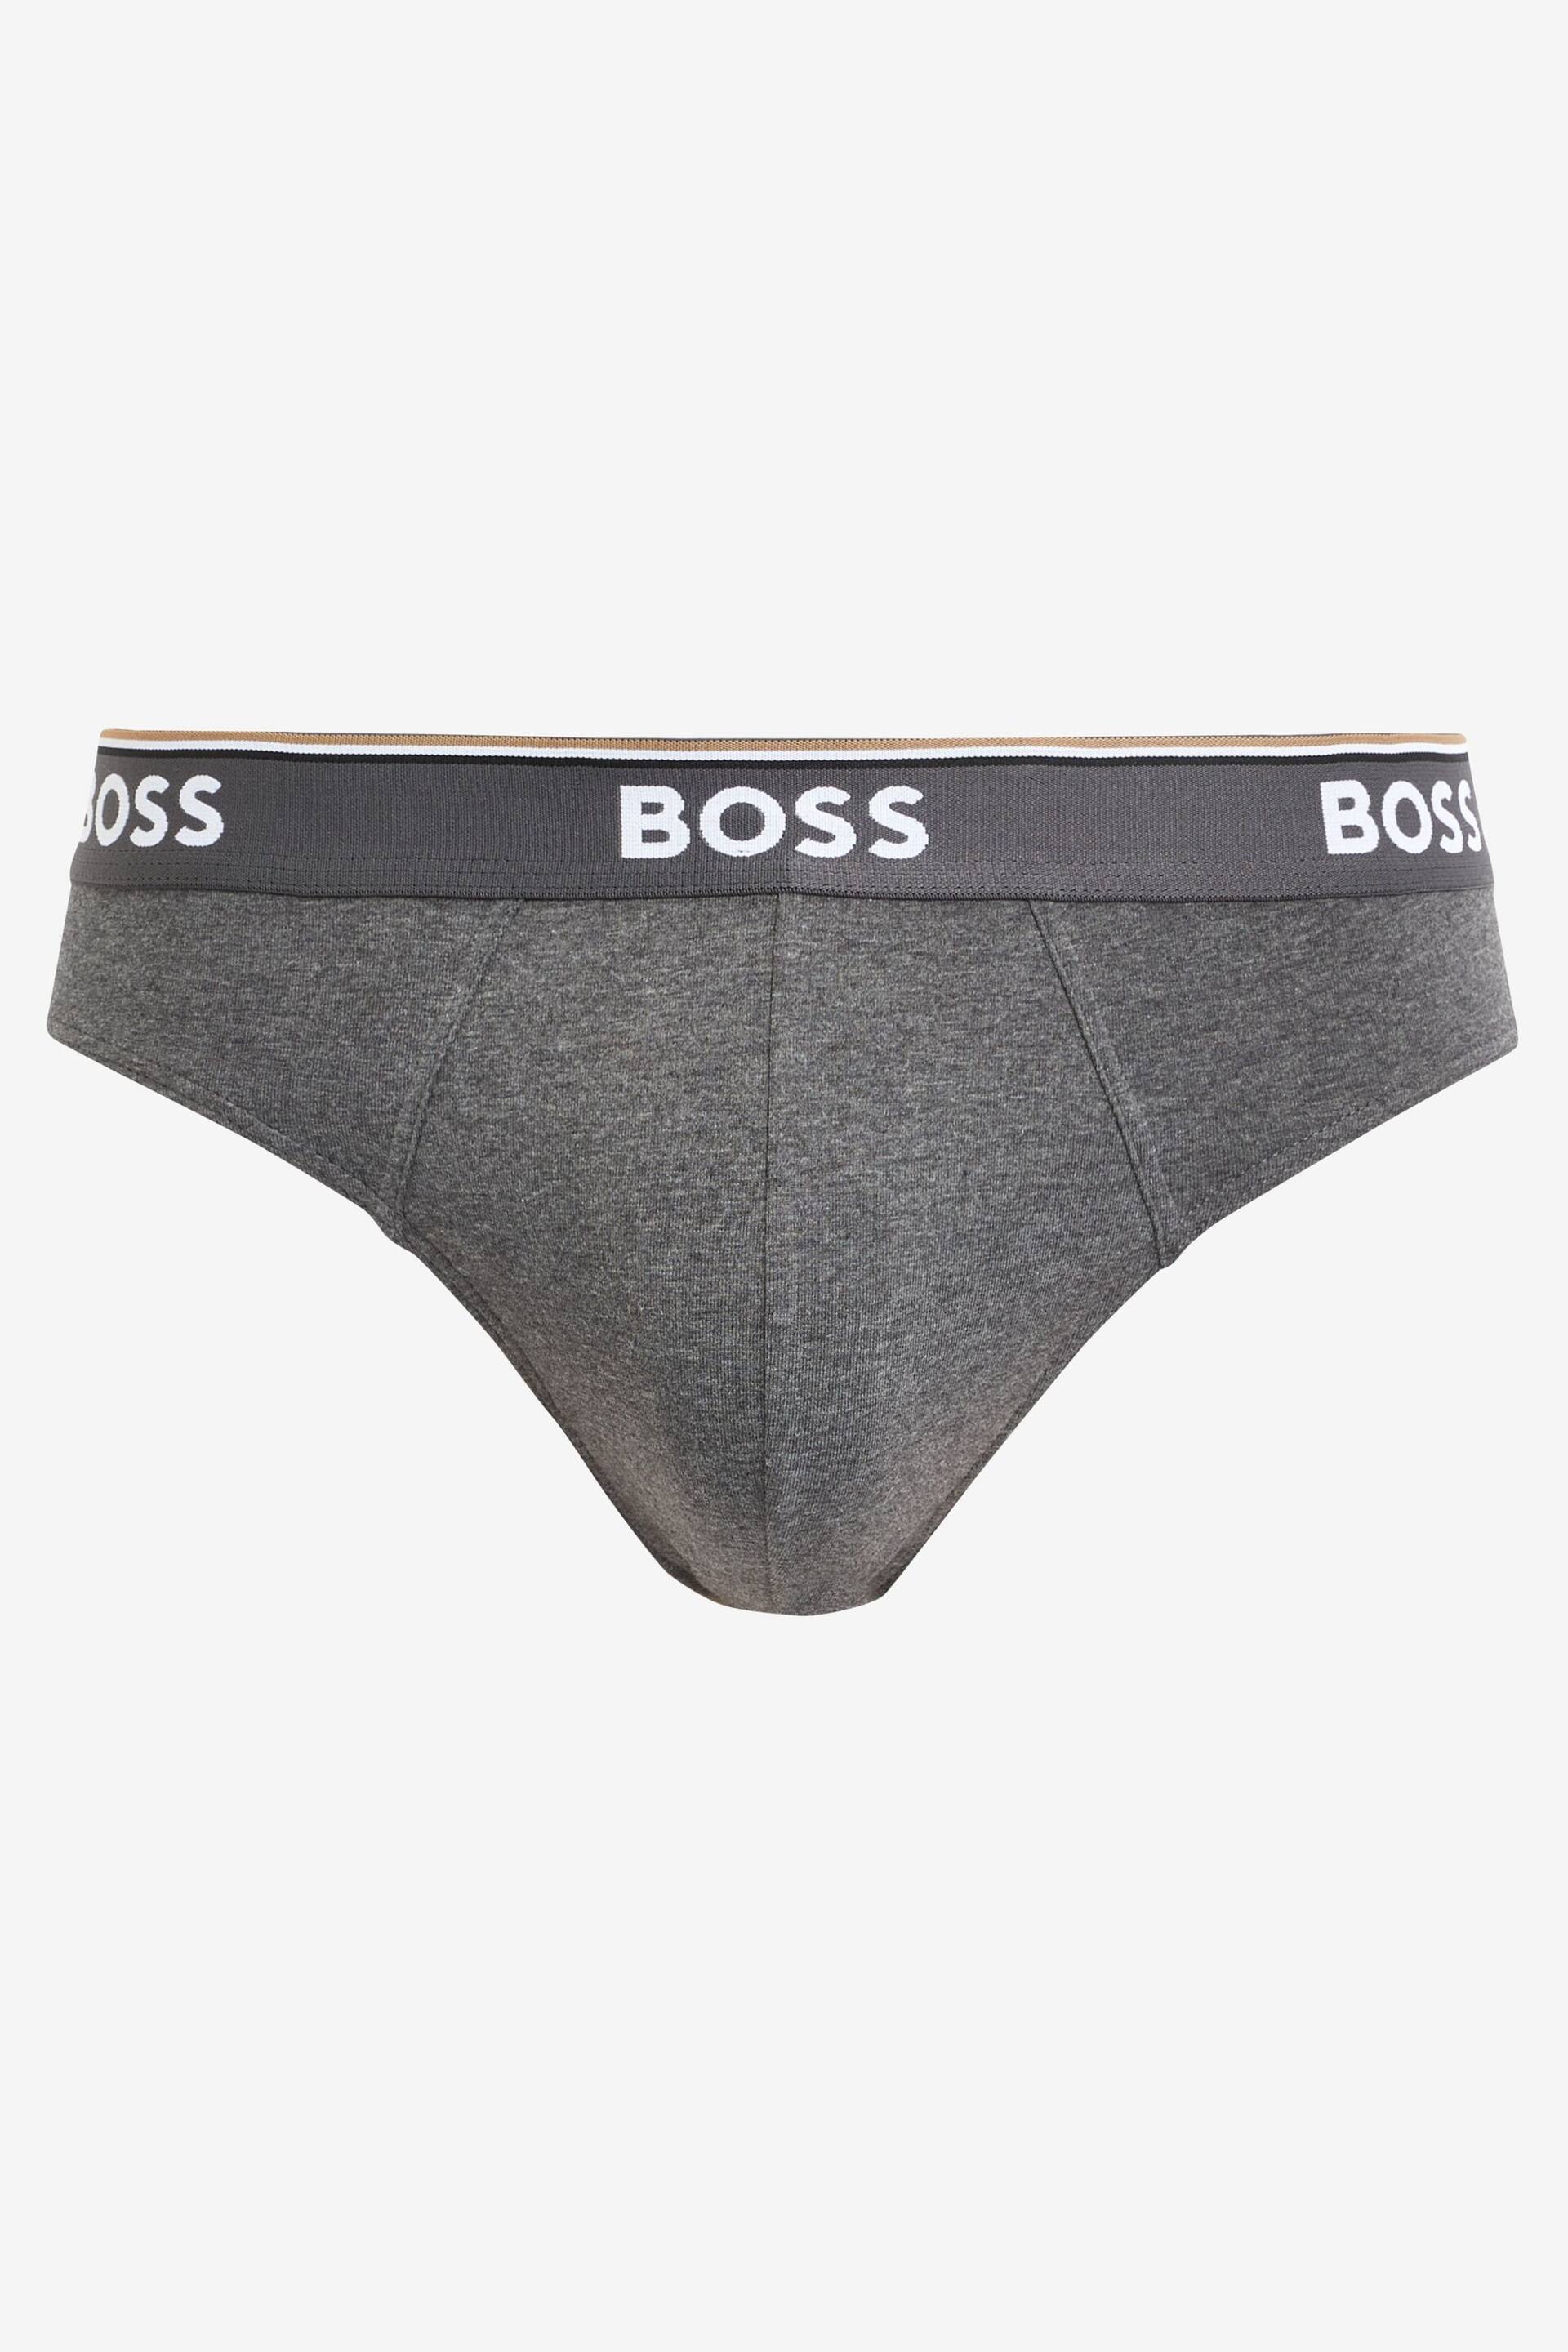 BOSS Grey Power Briefs 3 Pack - Image 2 of 9